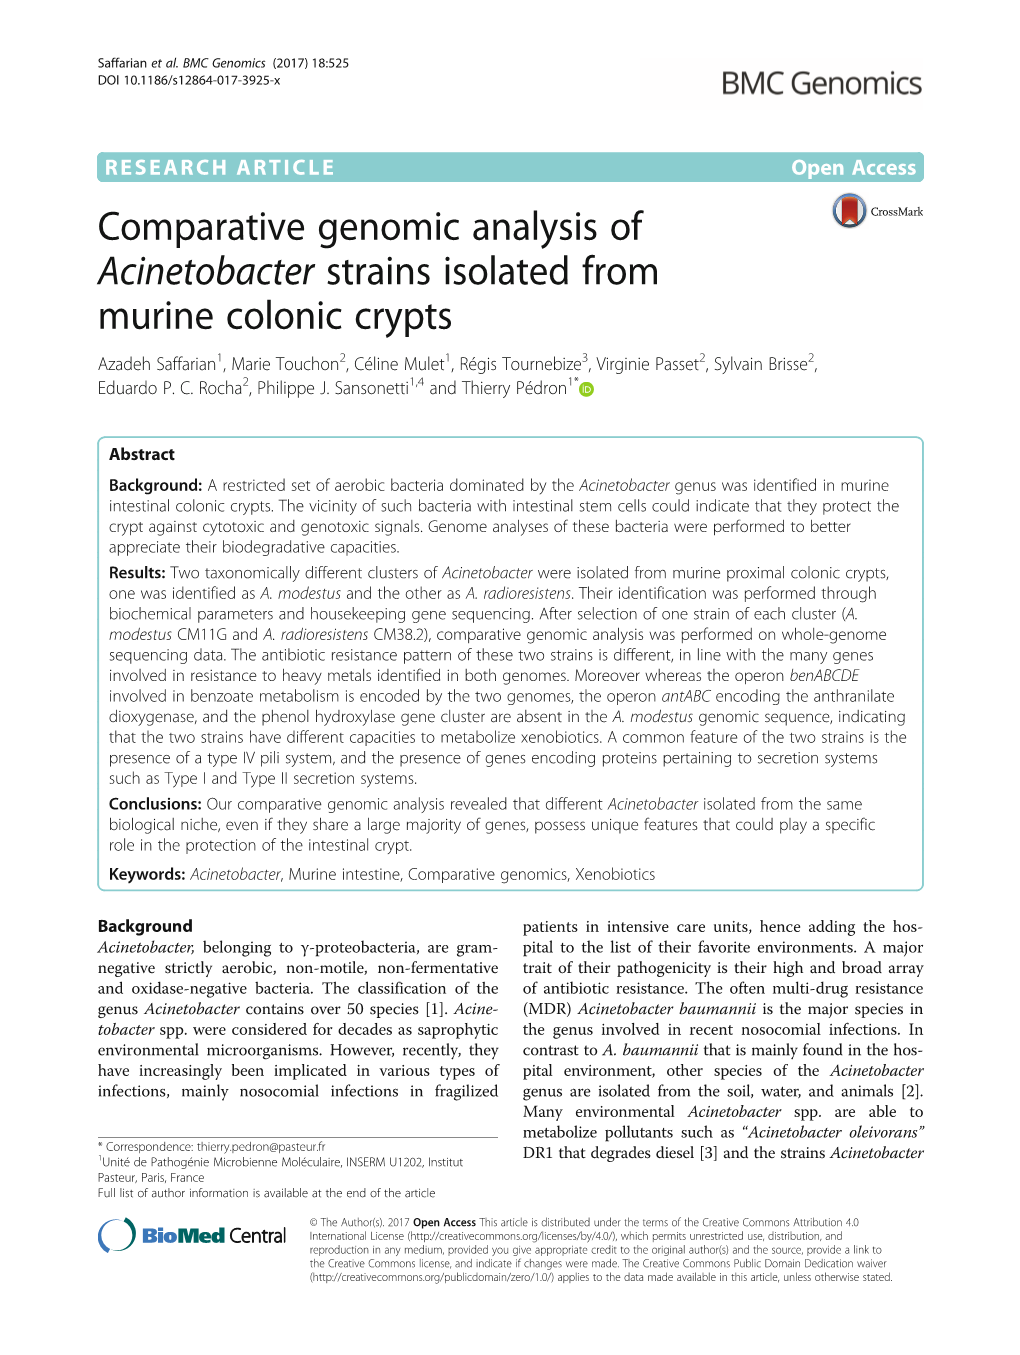 Comparative Genomic Analysis of Acinetobacter Strains Isolated From